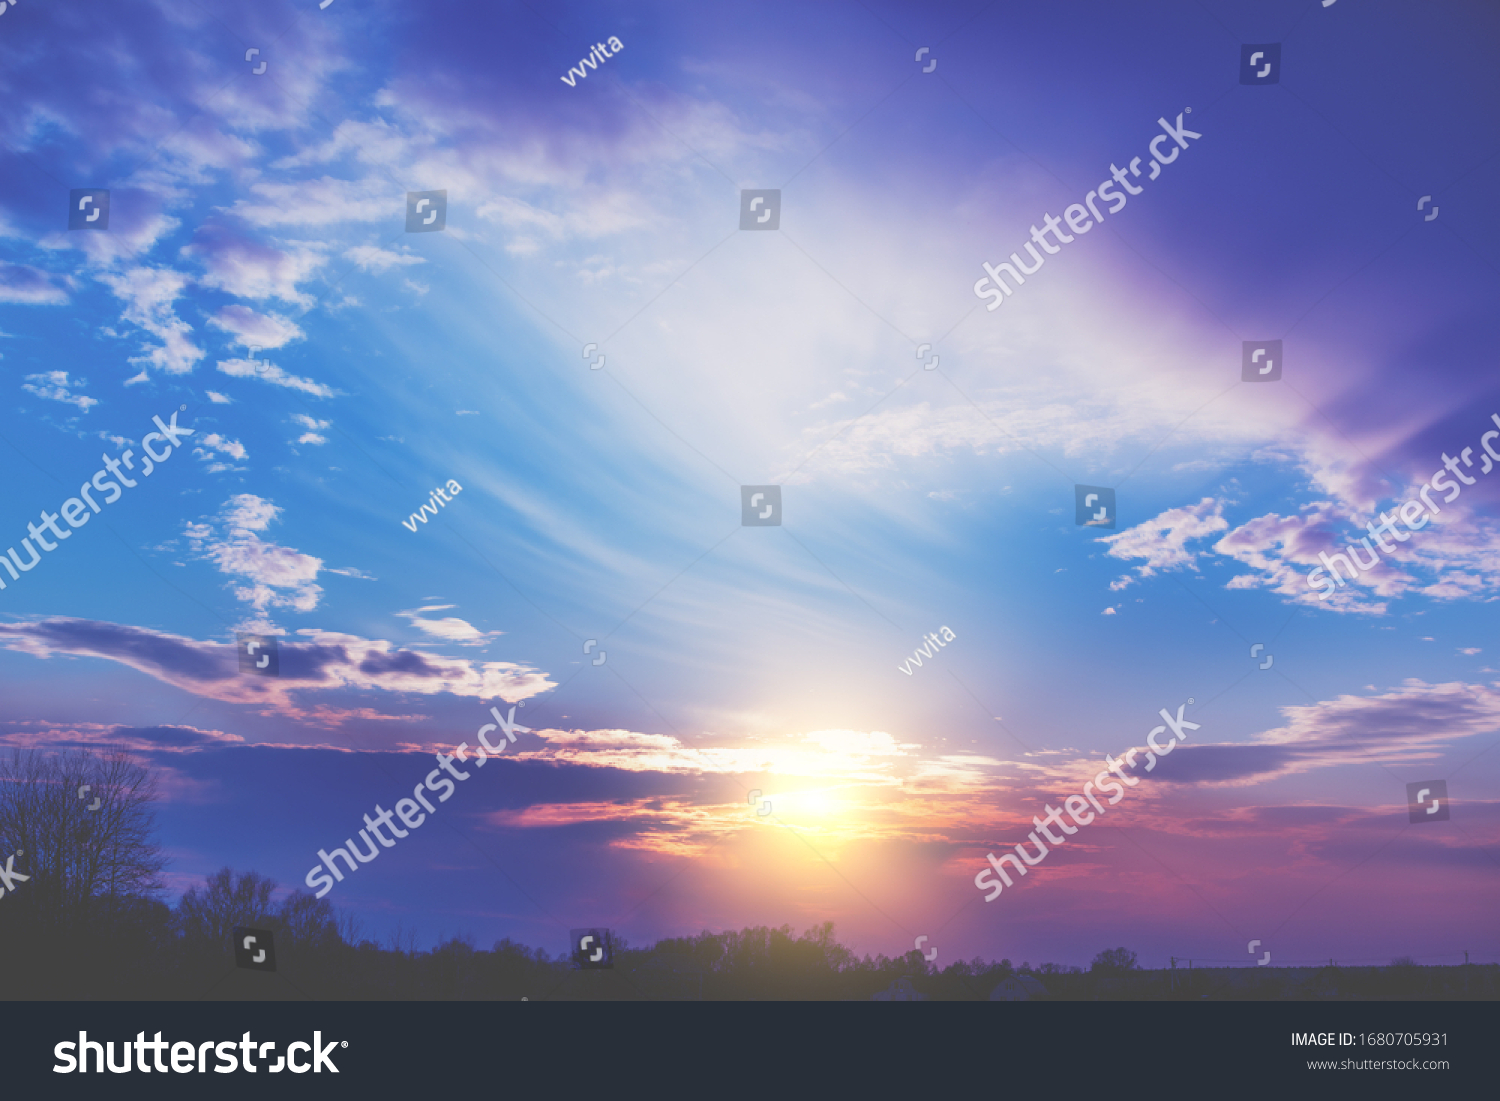 Colorful cloudy sky at sunset. Gradient color. Sky texture, abstract nature background #1680705931